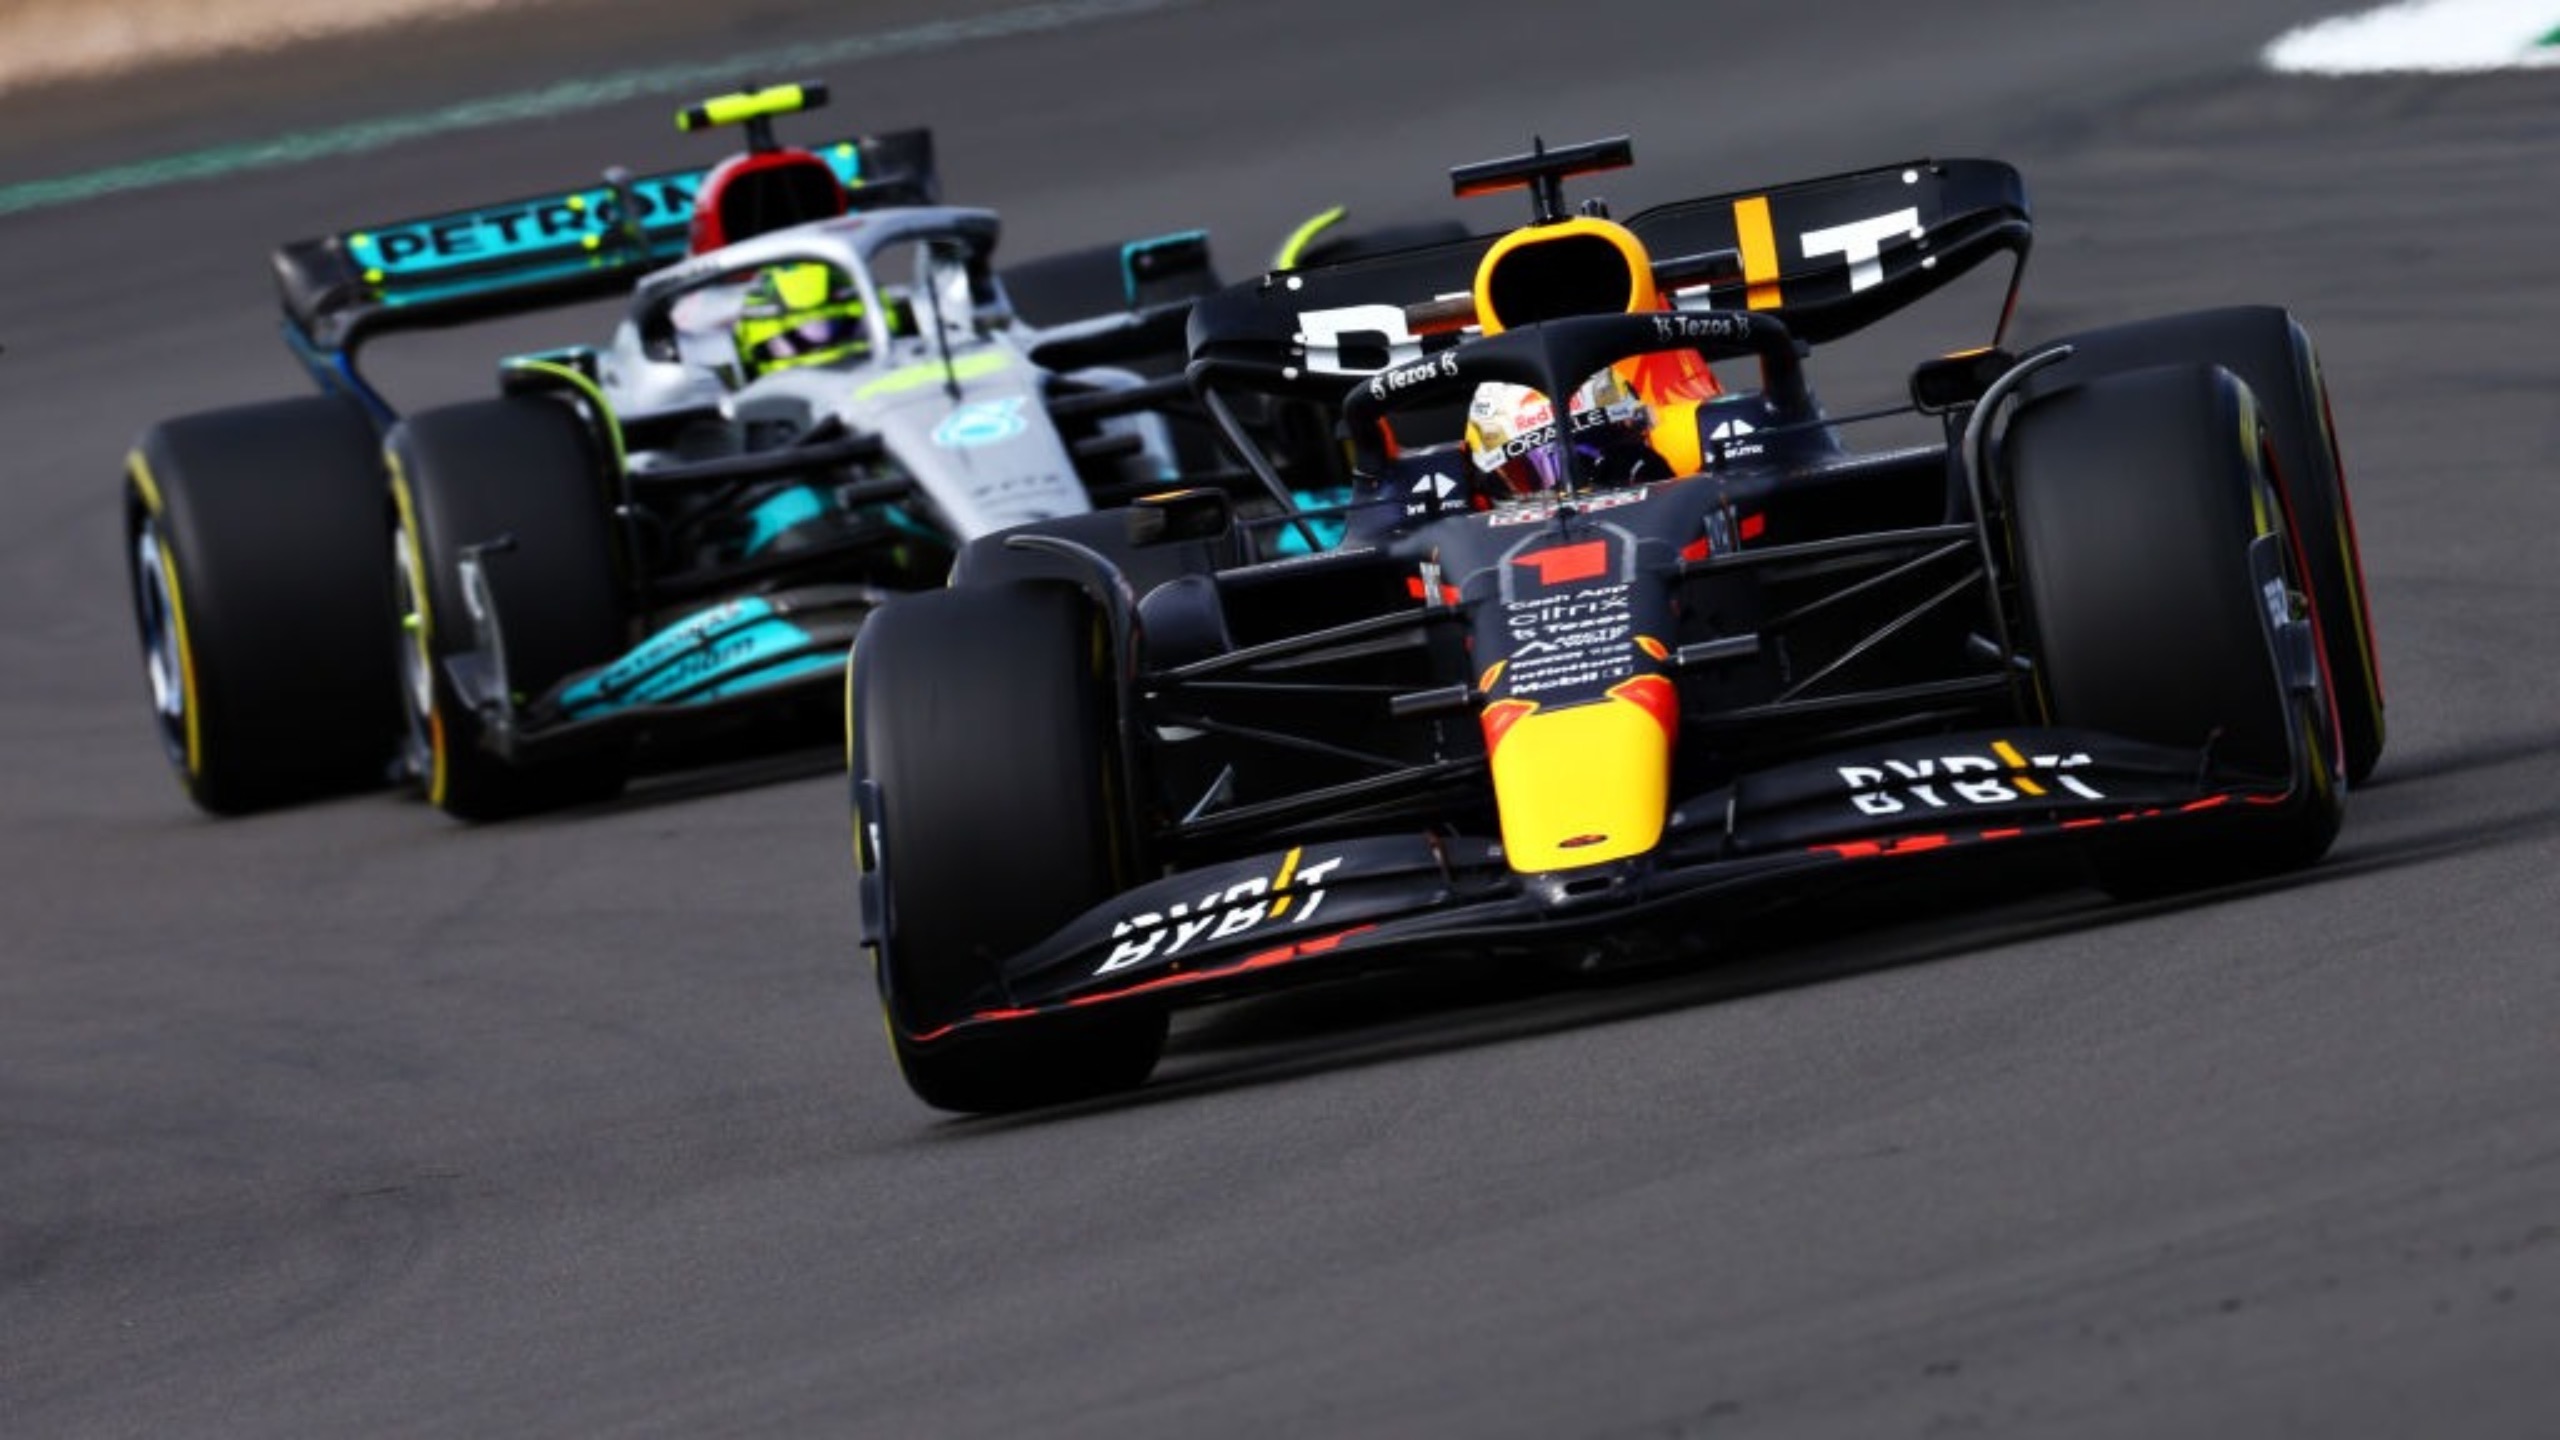 5 things we learned from Friday training at the British Grand Prix